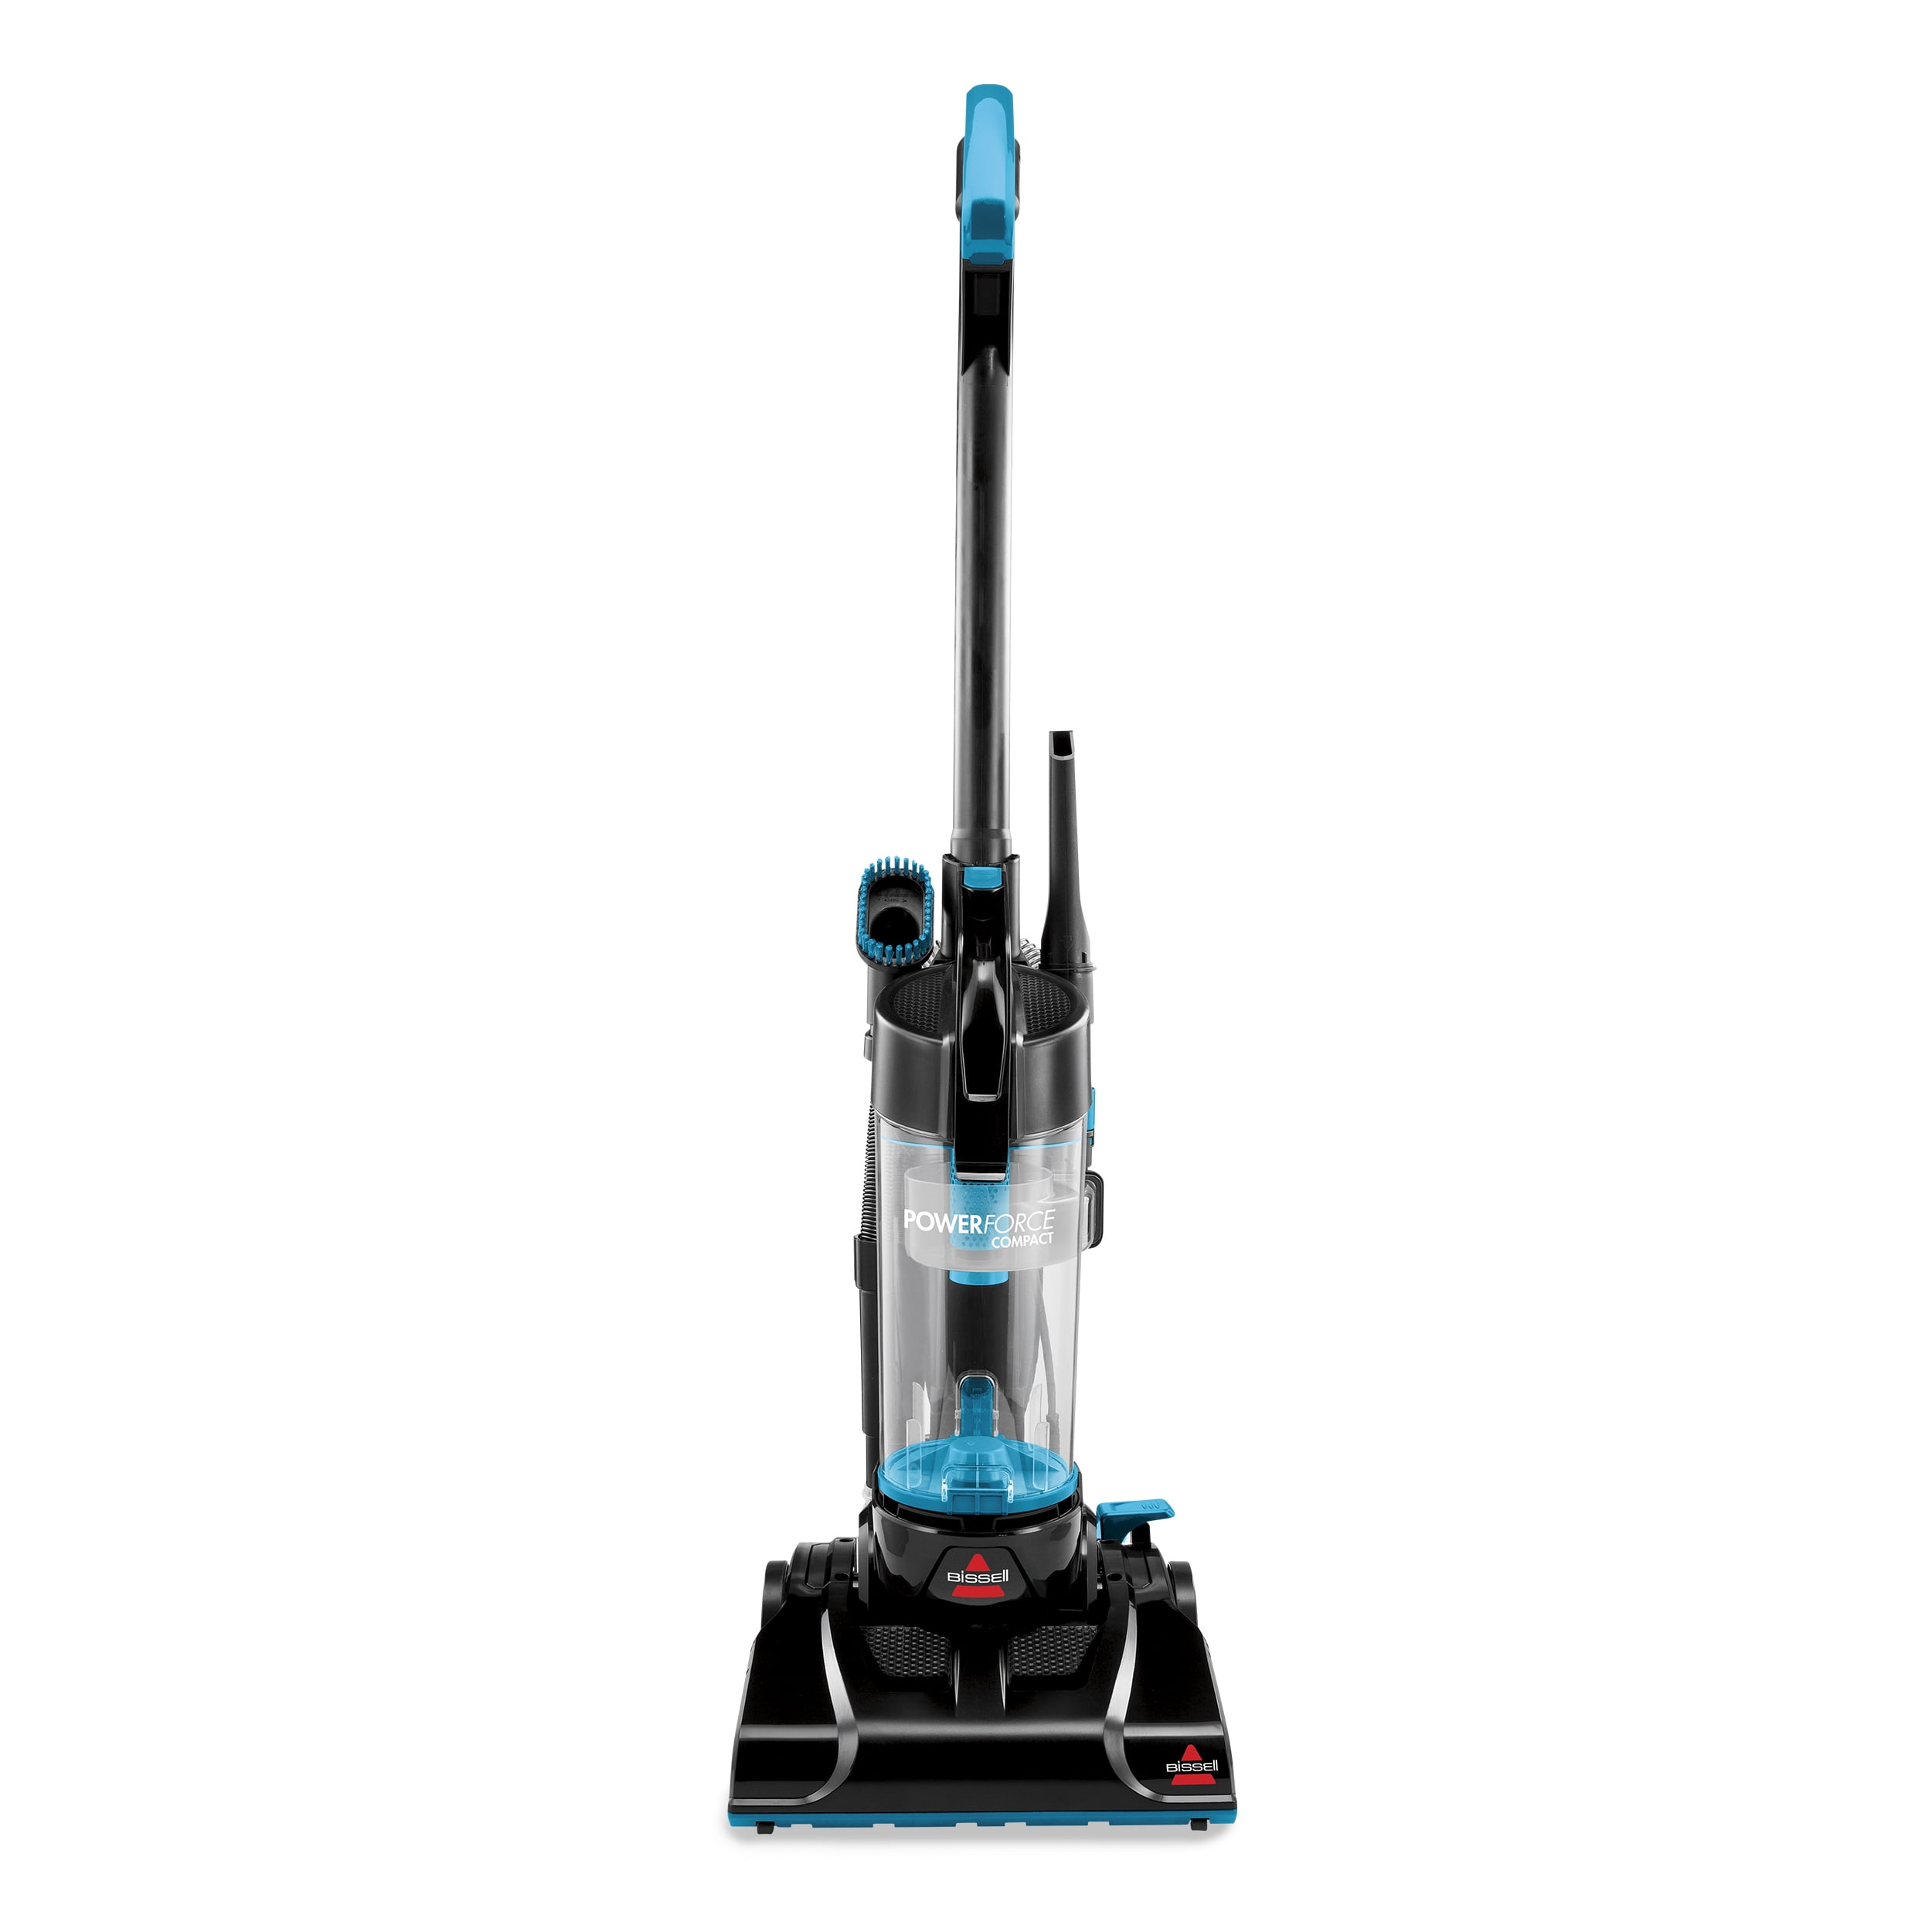 BISSELL Powerforce Helix Bagless Upright Carpet Vacuum Cleaner Surface Pet Vac 